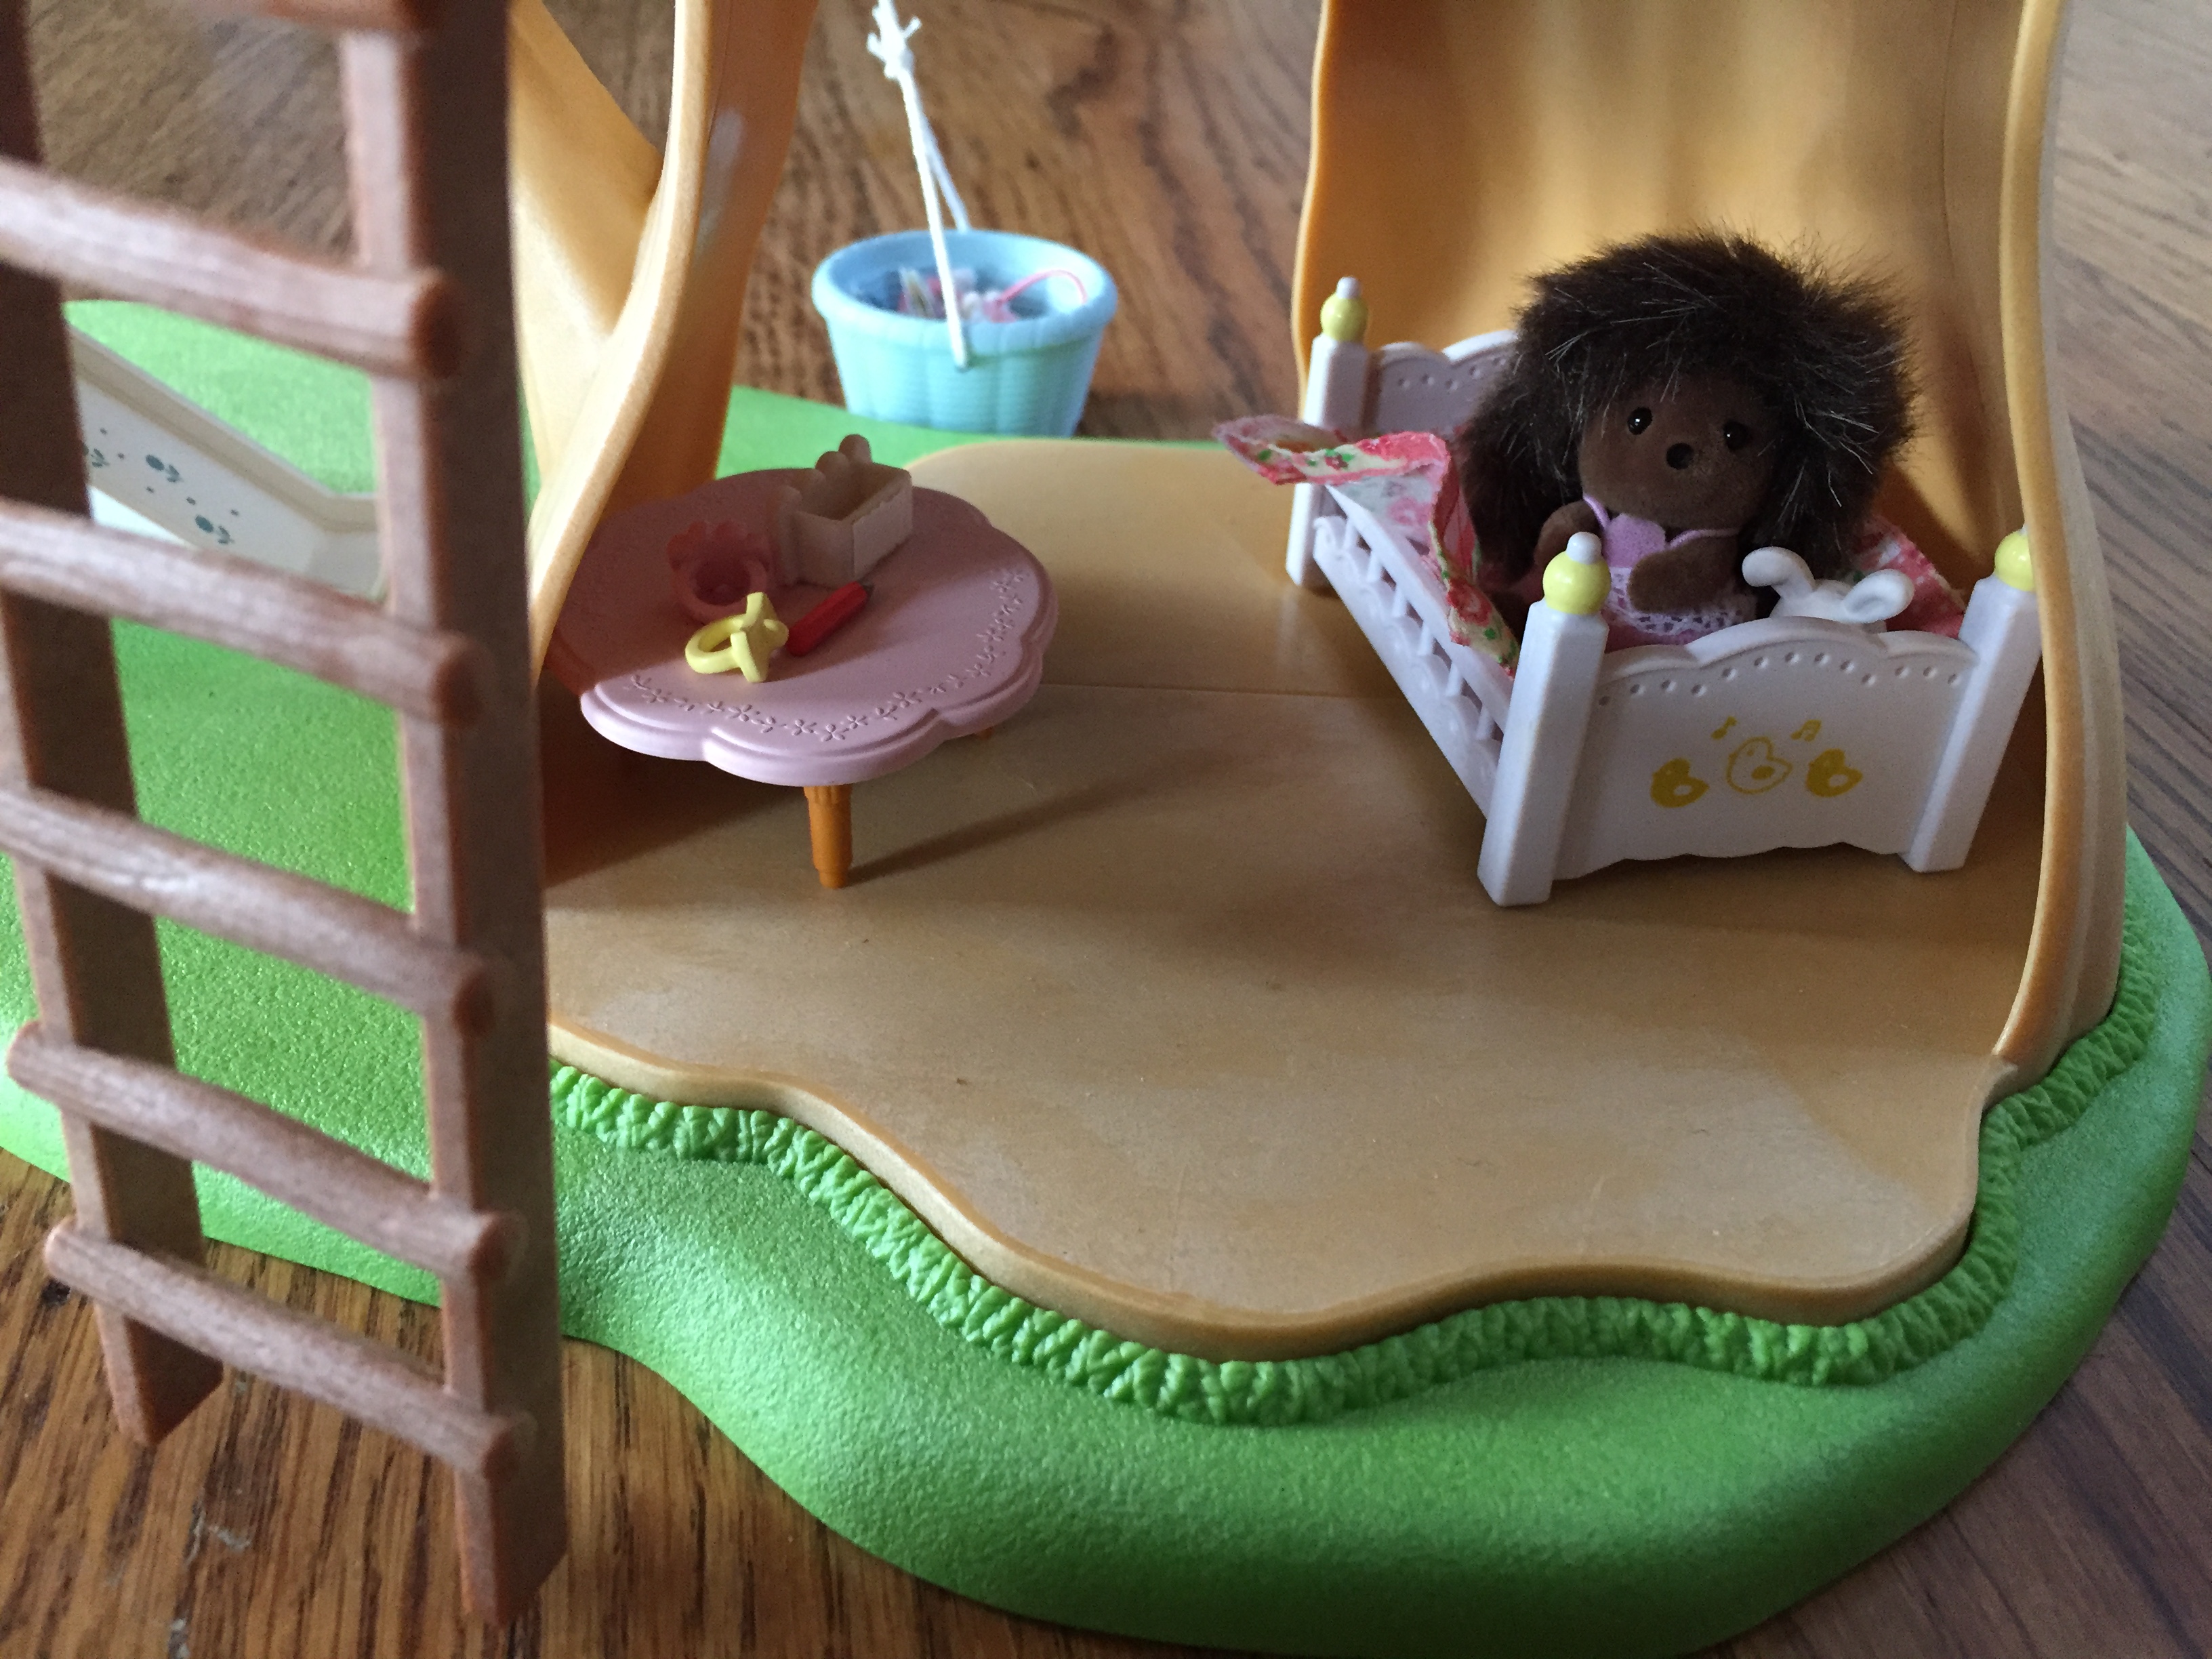 Calico Critter Adventure Treehouse bottom room tucked inside tree trunk furnished with bed table and baby hedgehog